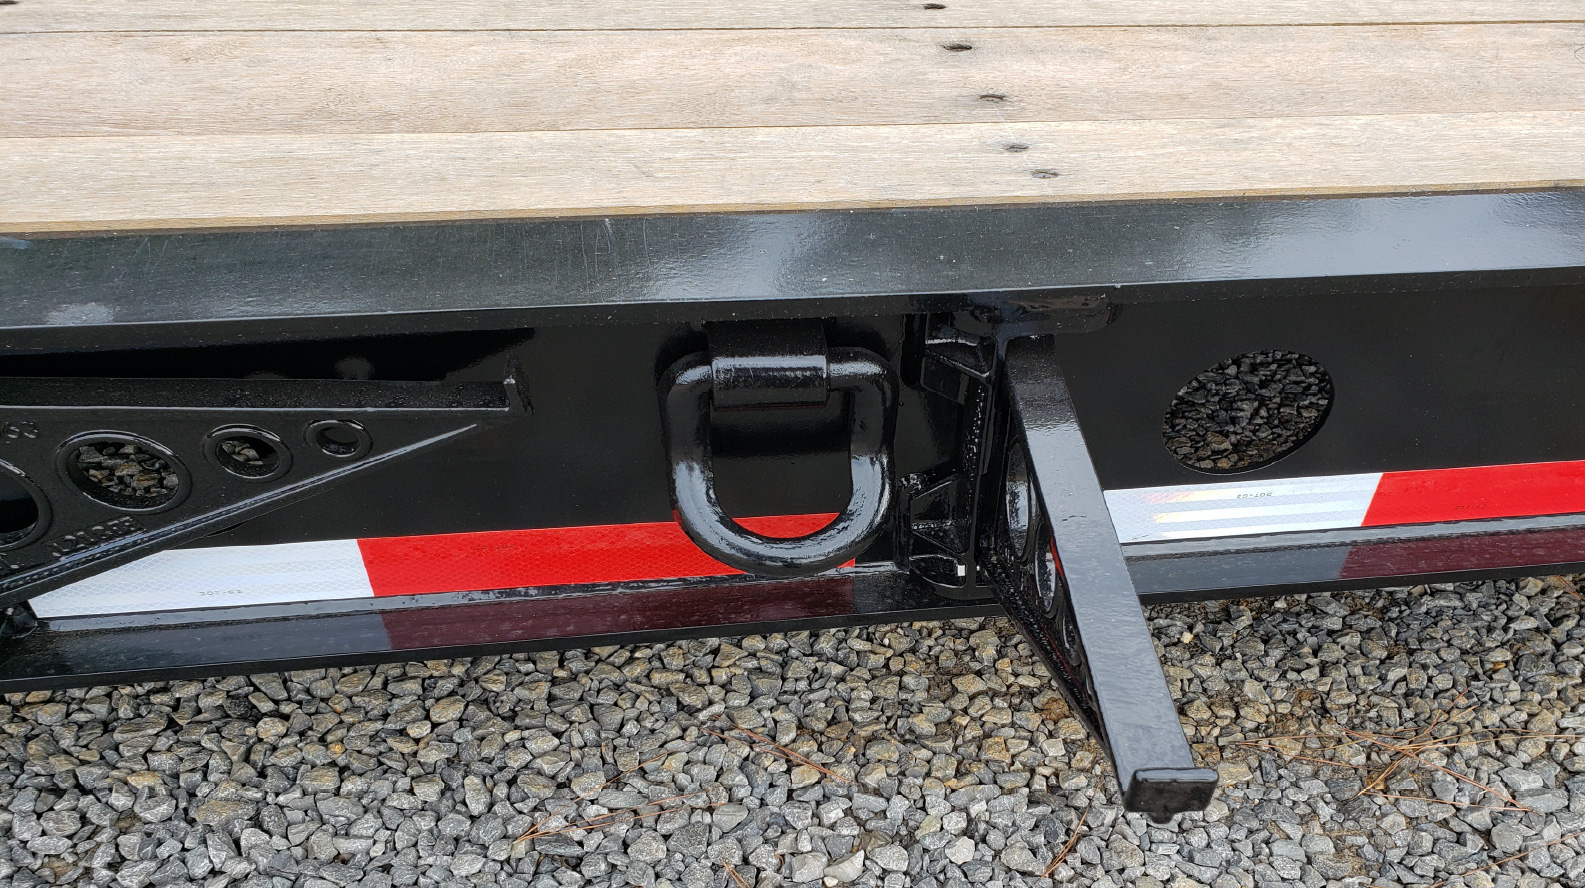 Swing-out brackets to handle wider equipment or cargo